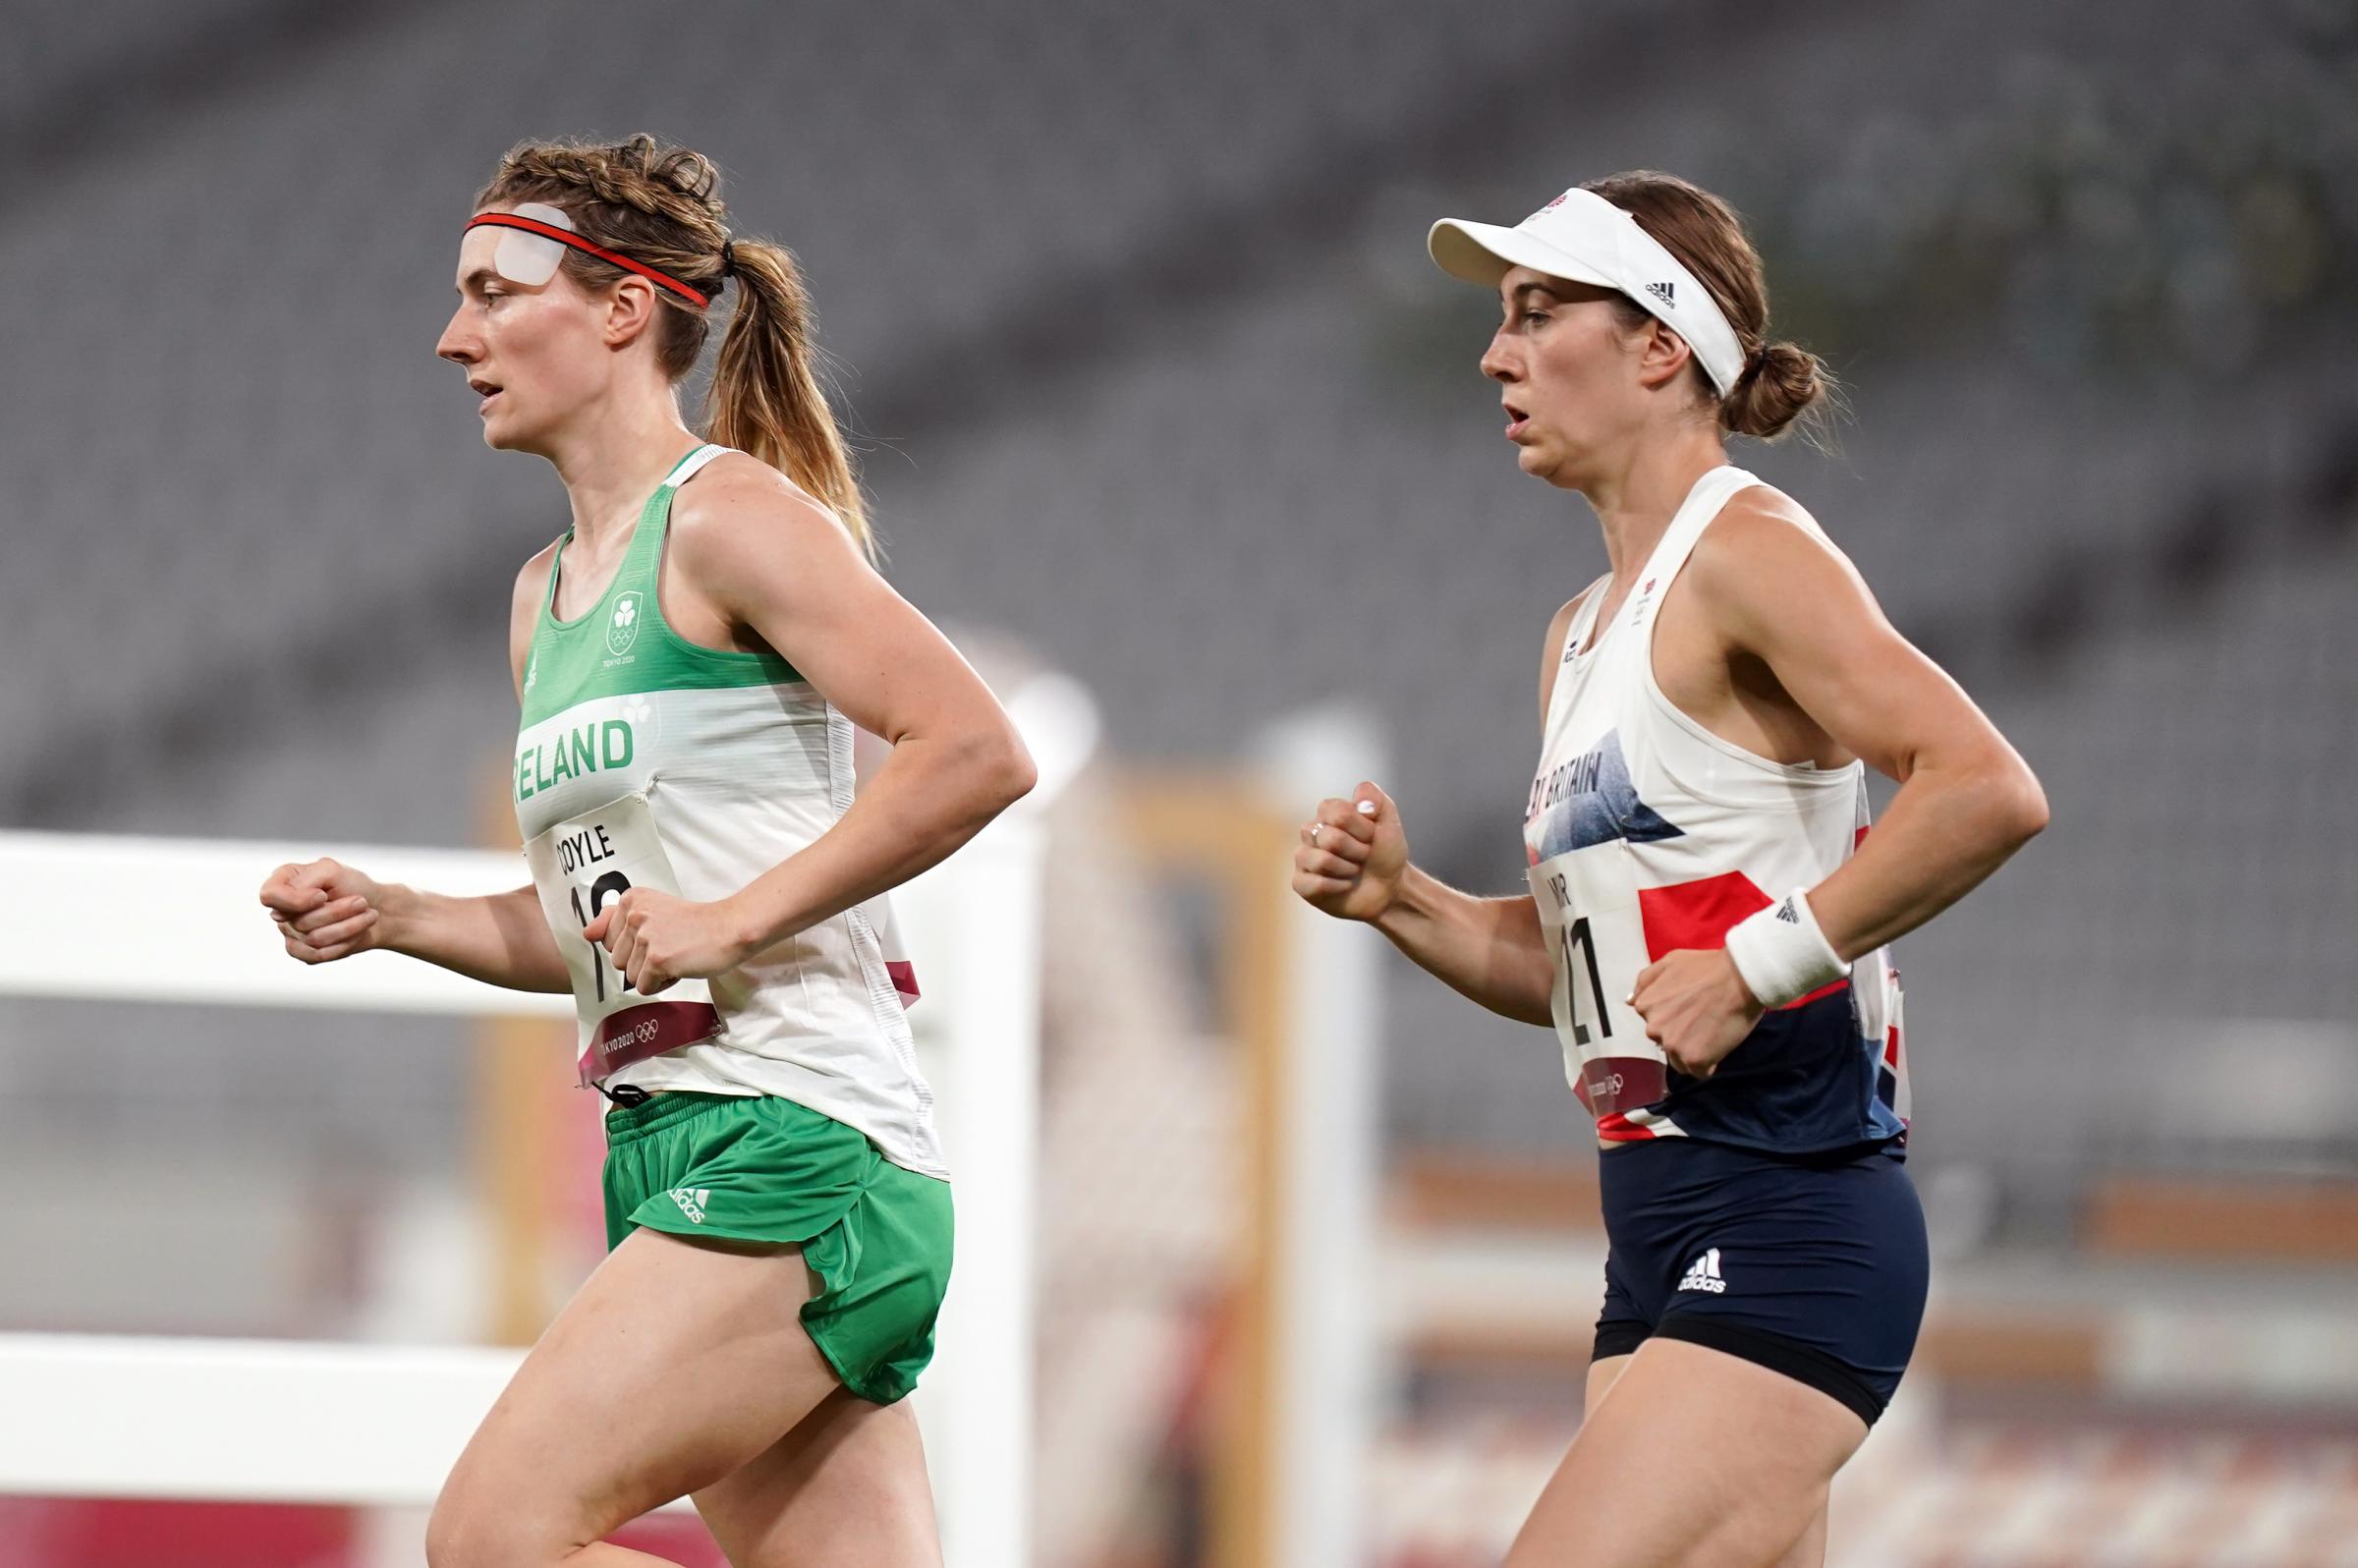 Great Britains Joanna Muir (right) and Irelands Natalya Coyle during the Modern Pentathlon, Womens Individual - Laser Run at Tokyo Stadium on the fourteenth day of the Tokyo 2020 Olympic Games in Japan. Picture date: Friday August 6, 2021.